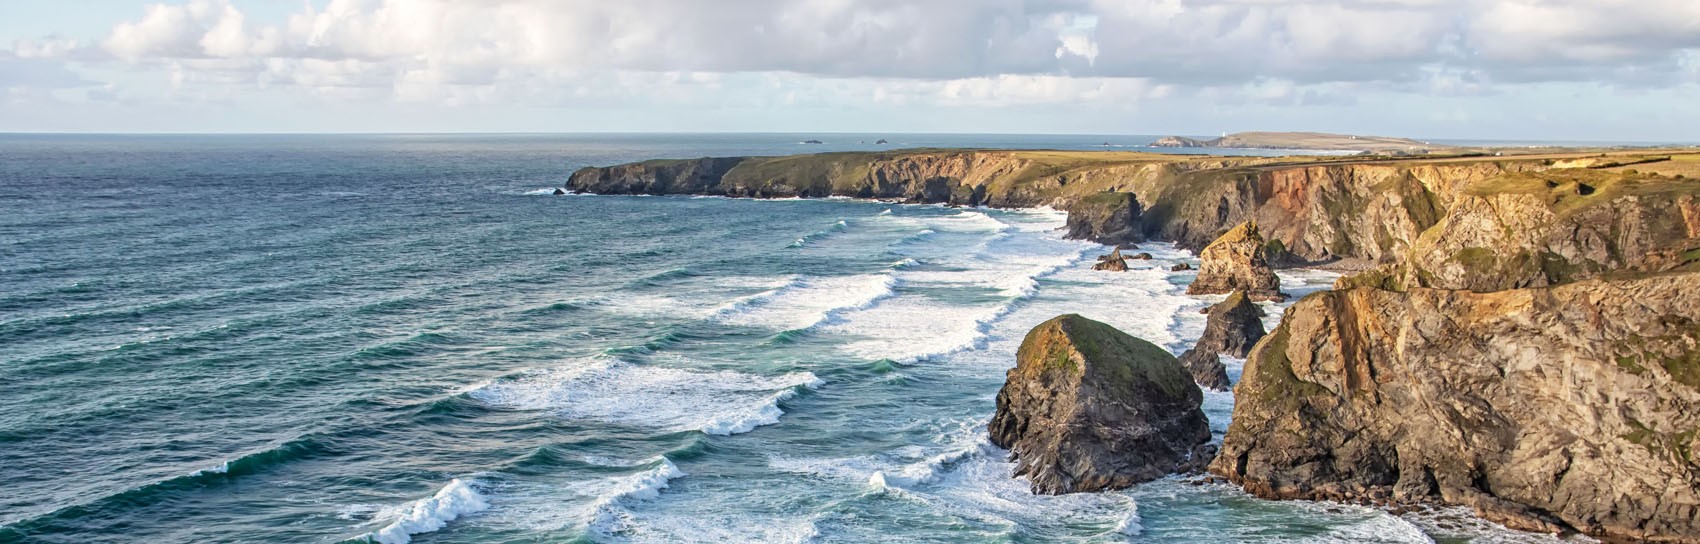 The view over Bedruthan Steps in North Cornwall. Photograph by ALEX GRAEME